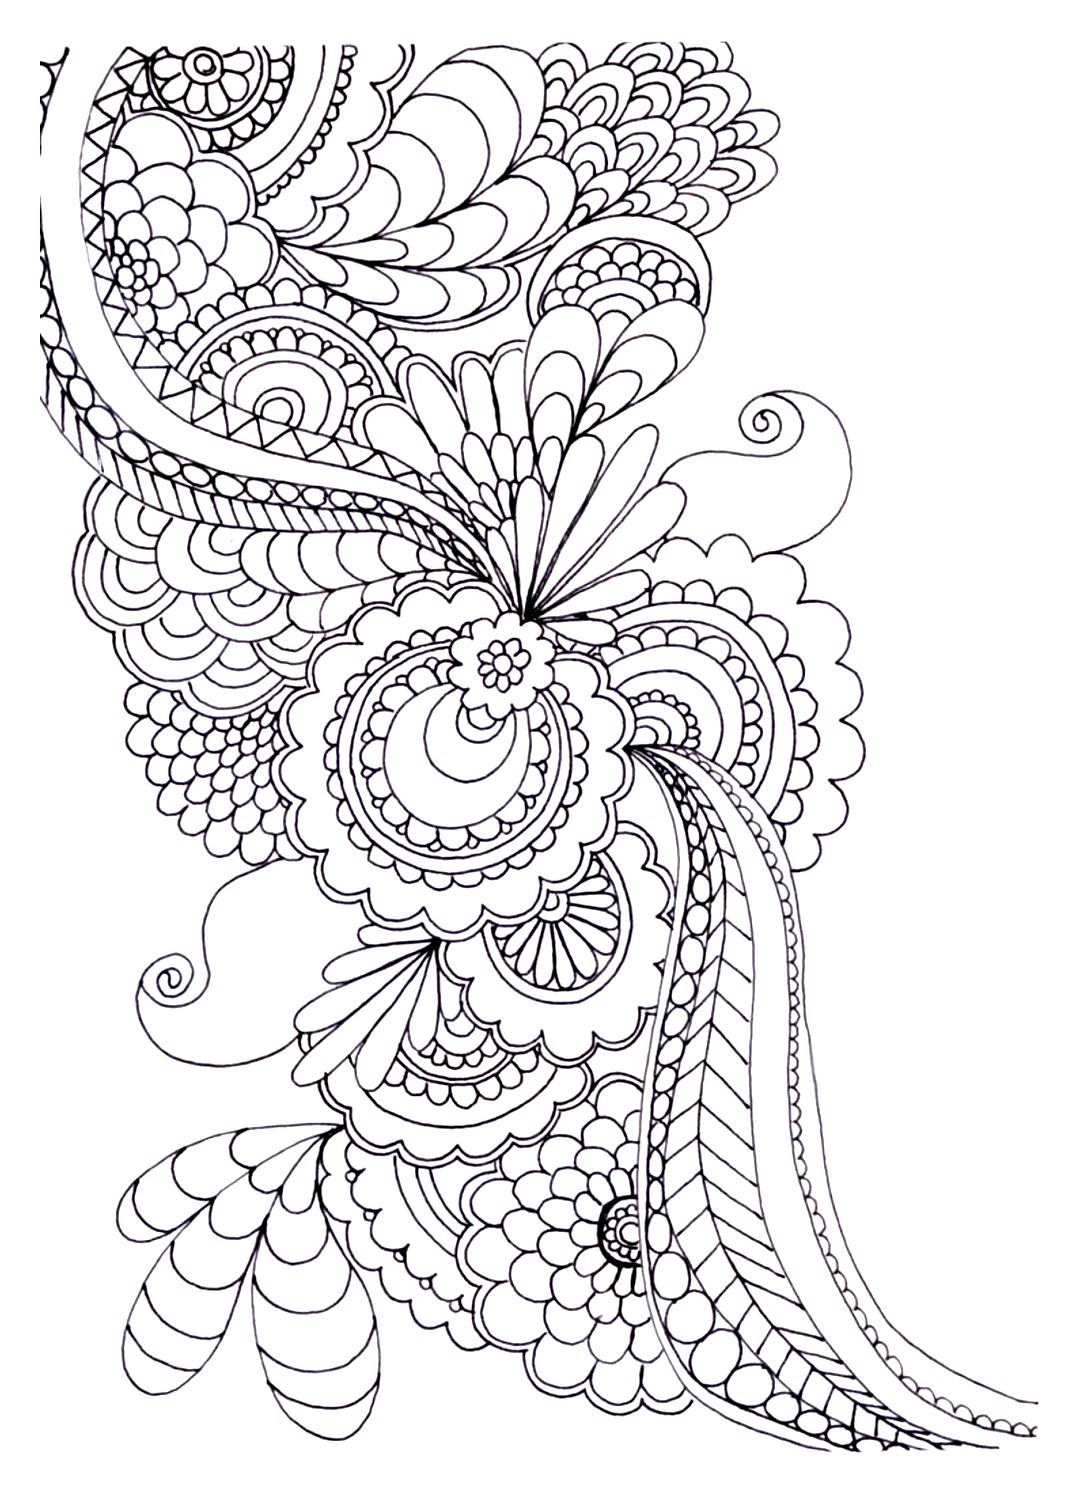 Download Zen anti stress to print drawing flowers - Anti stress Adult Coloring Pages